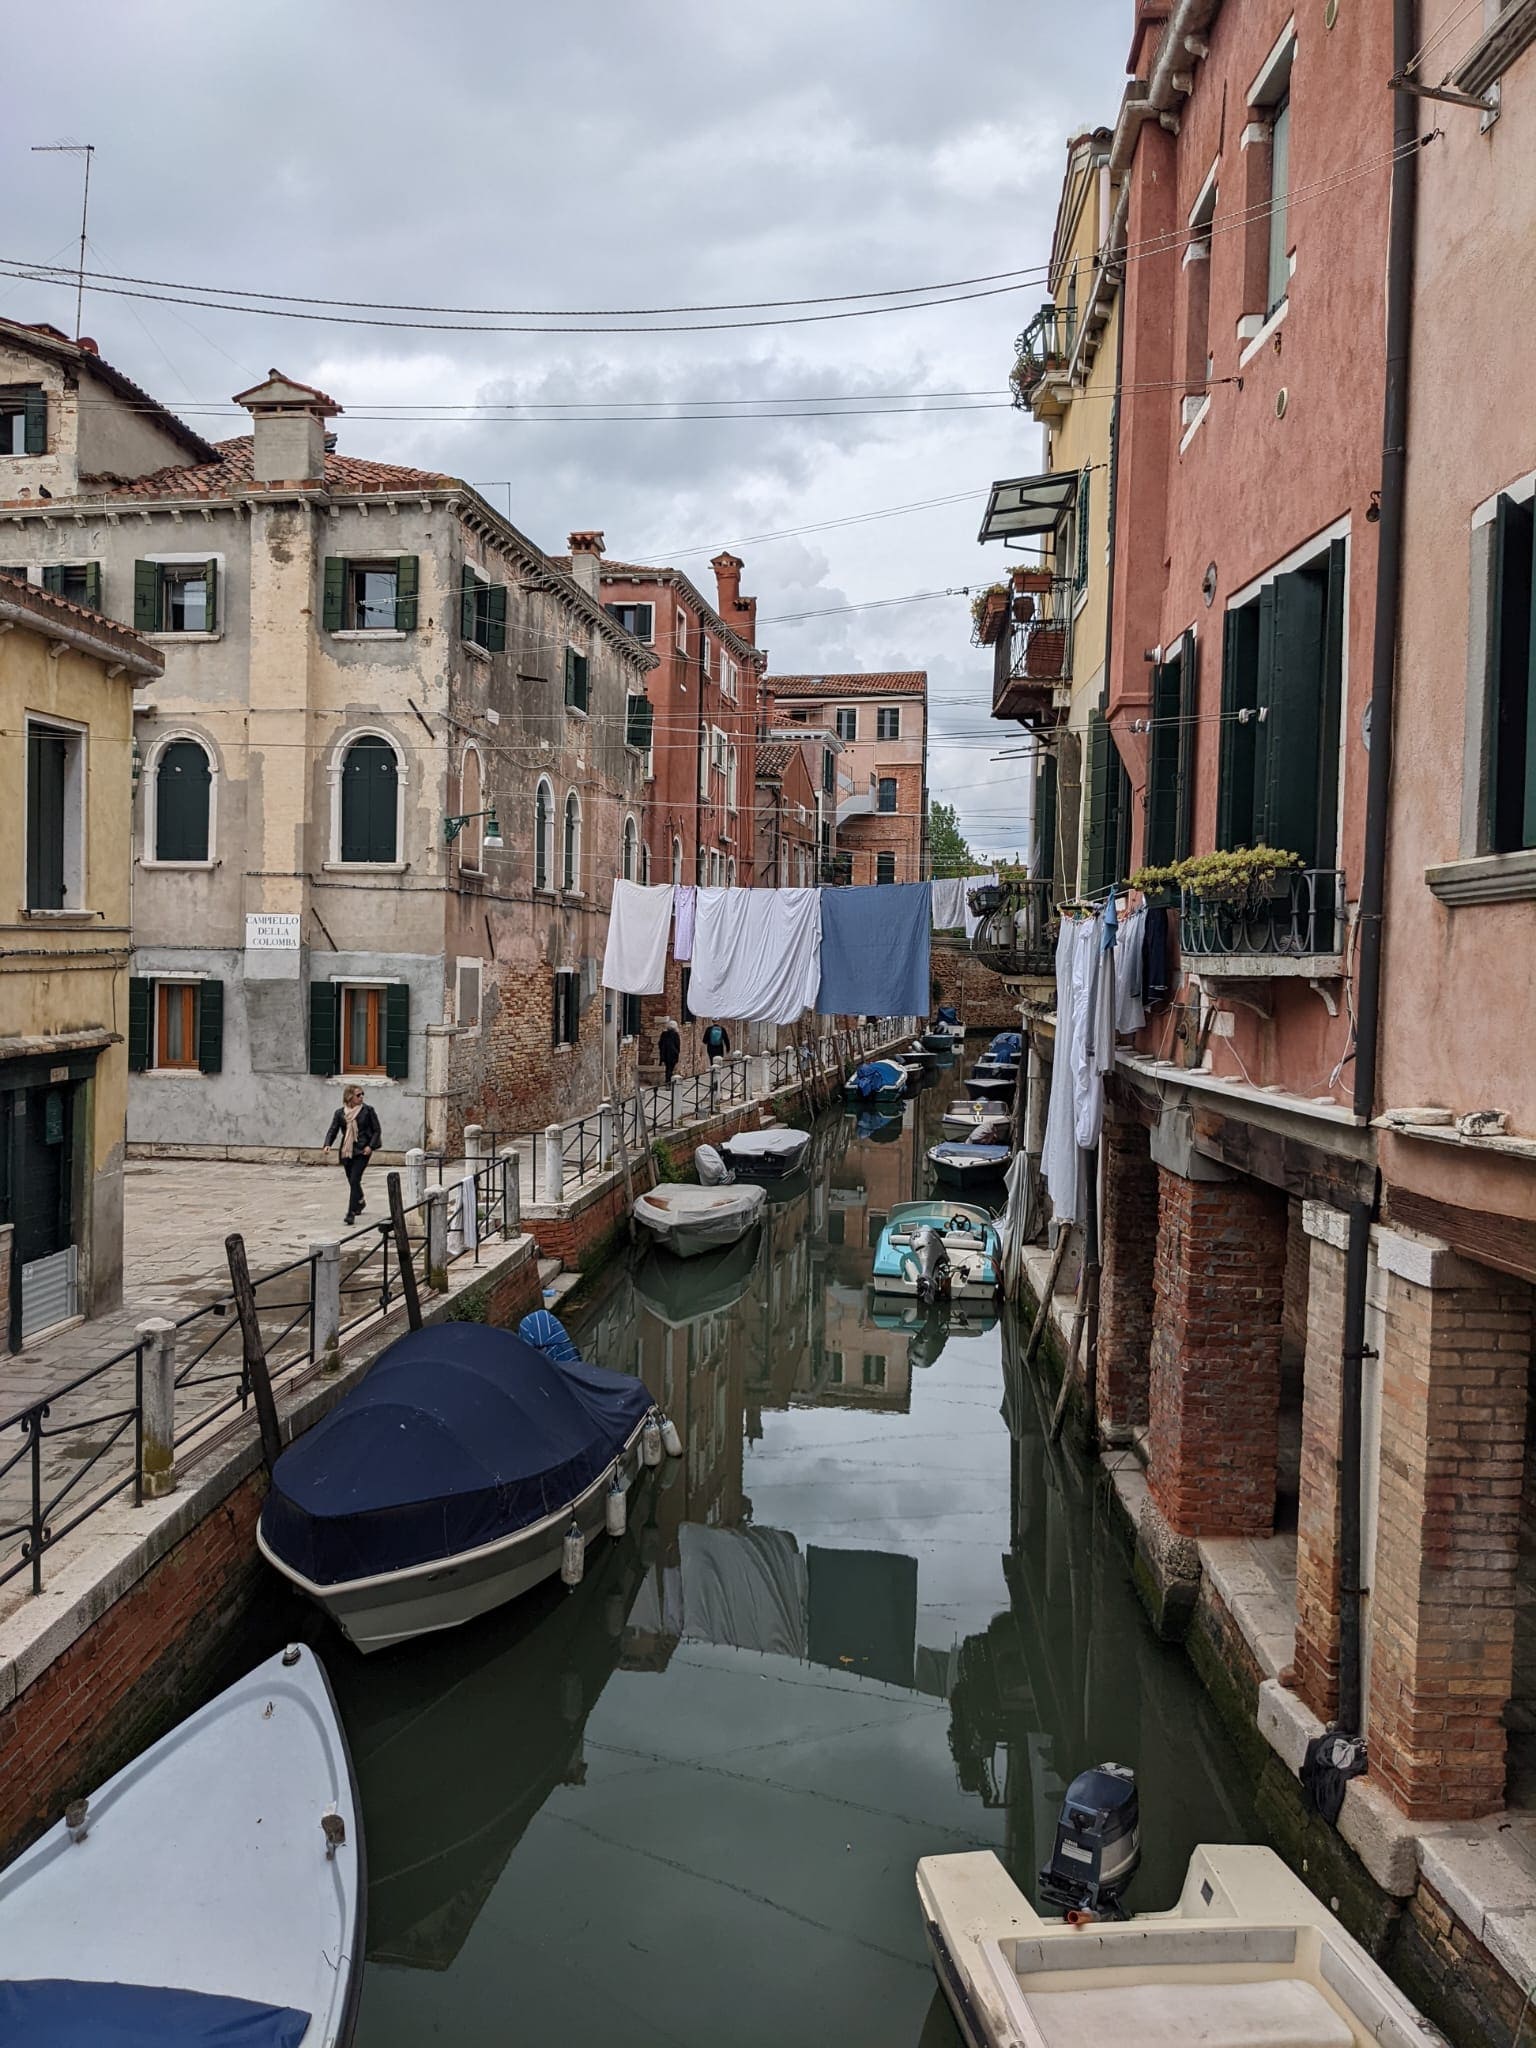 boats and buildings on a canal in Venice